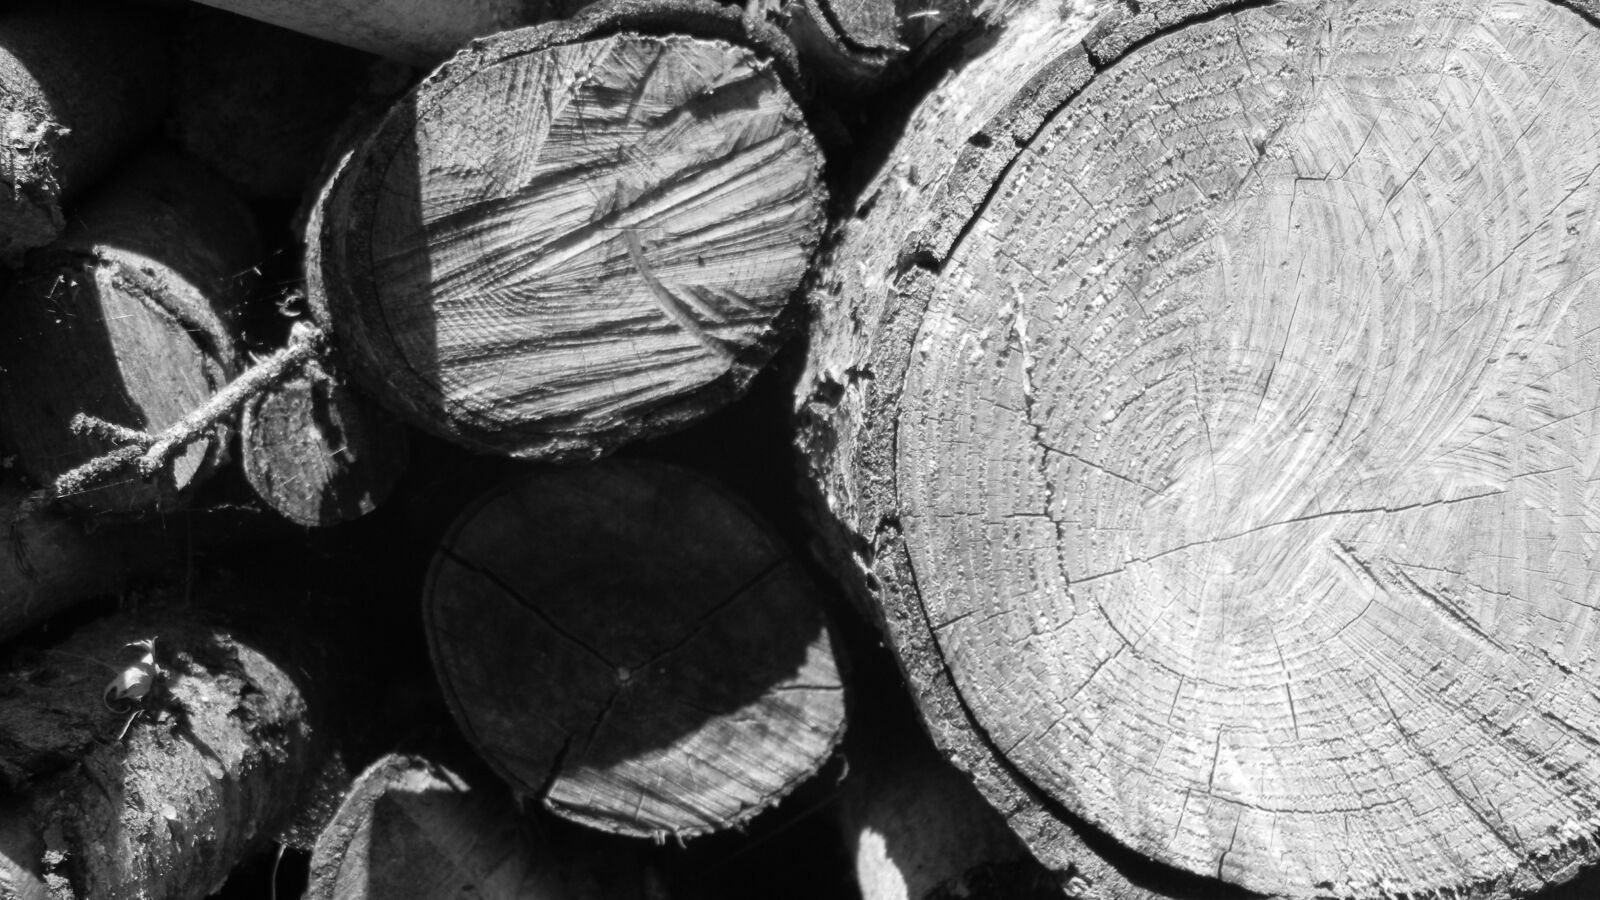 Nikon Coolpix S70 sample photo. Wood, black and white photography